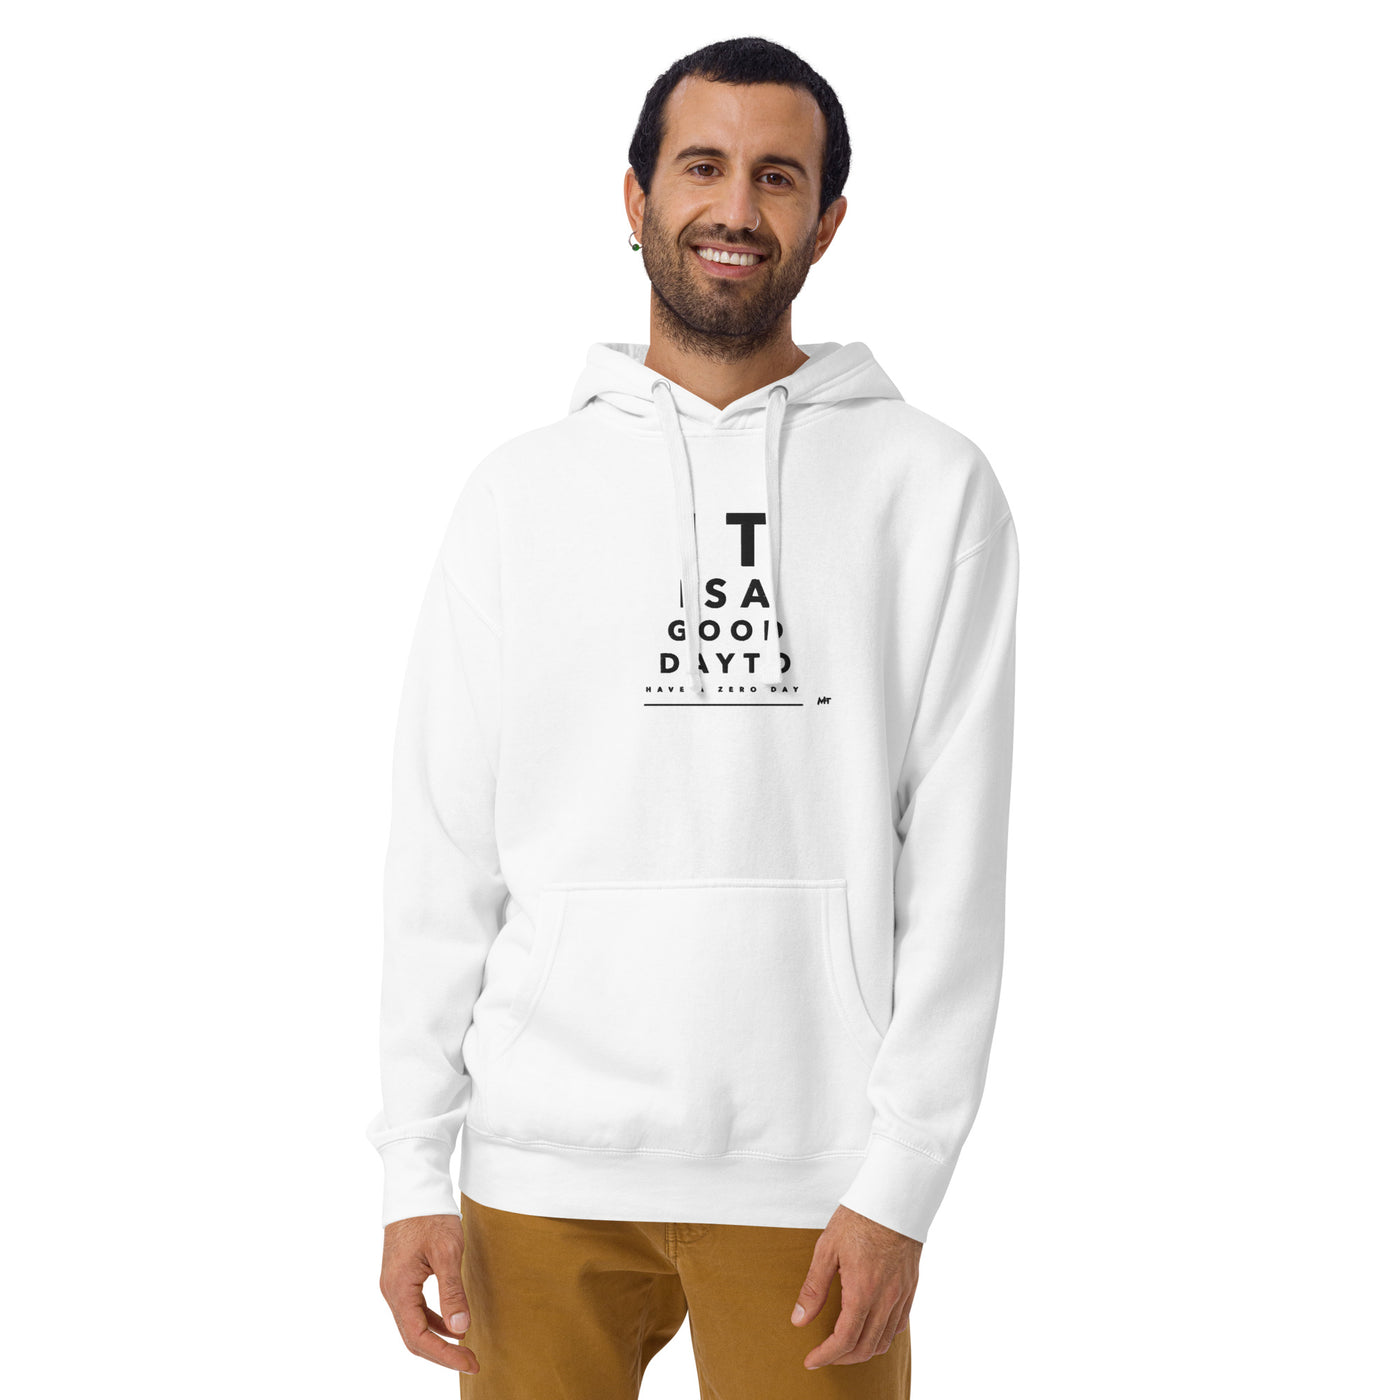 It is a good day to have a zero day - Unisex Hoodie (embroidery)